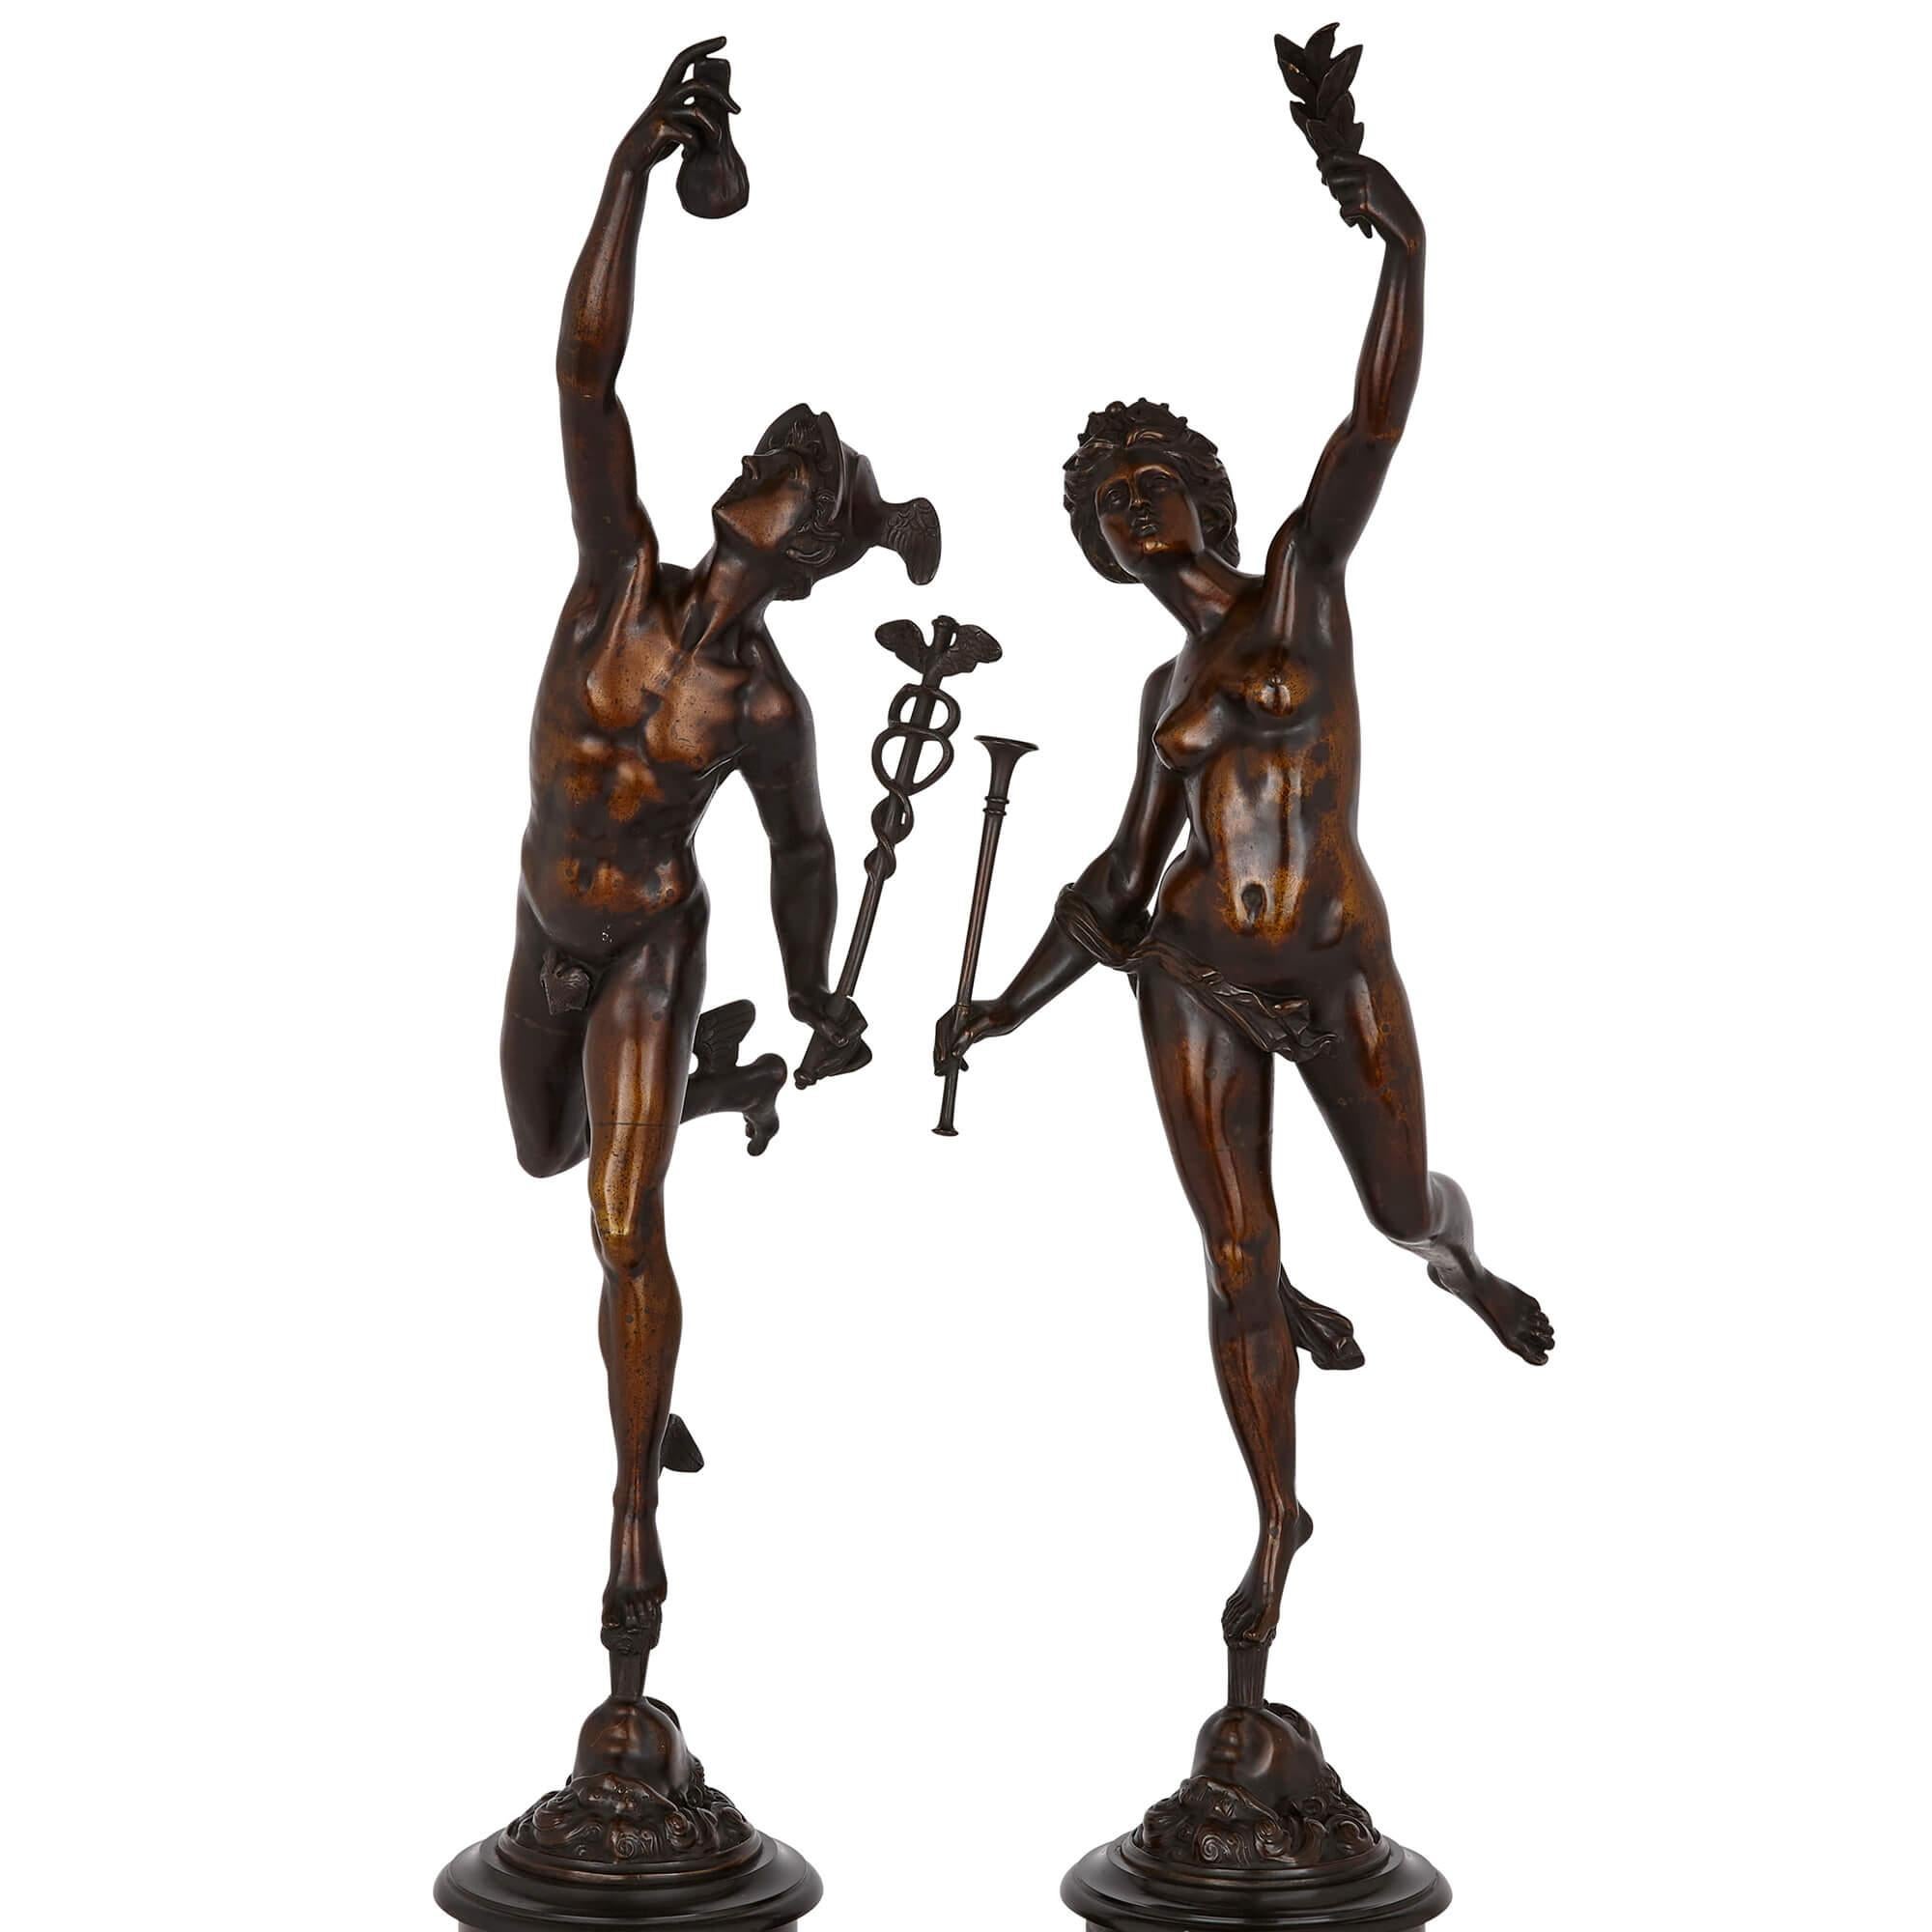 Pair of patinated bronze figures of Mercury and Fortuna, after Giambologna
French, Late 19th century
Measures: Height 87cm, width 15/19cm, depth 31cm

This pair of patinated bronze figures is based on the work of the renowned Mannerist sculptor